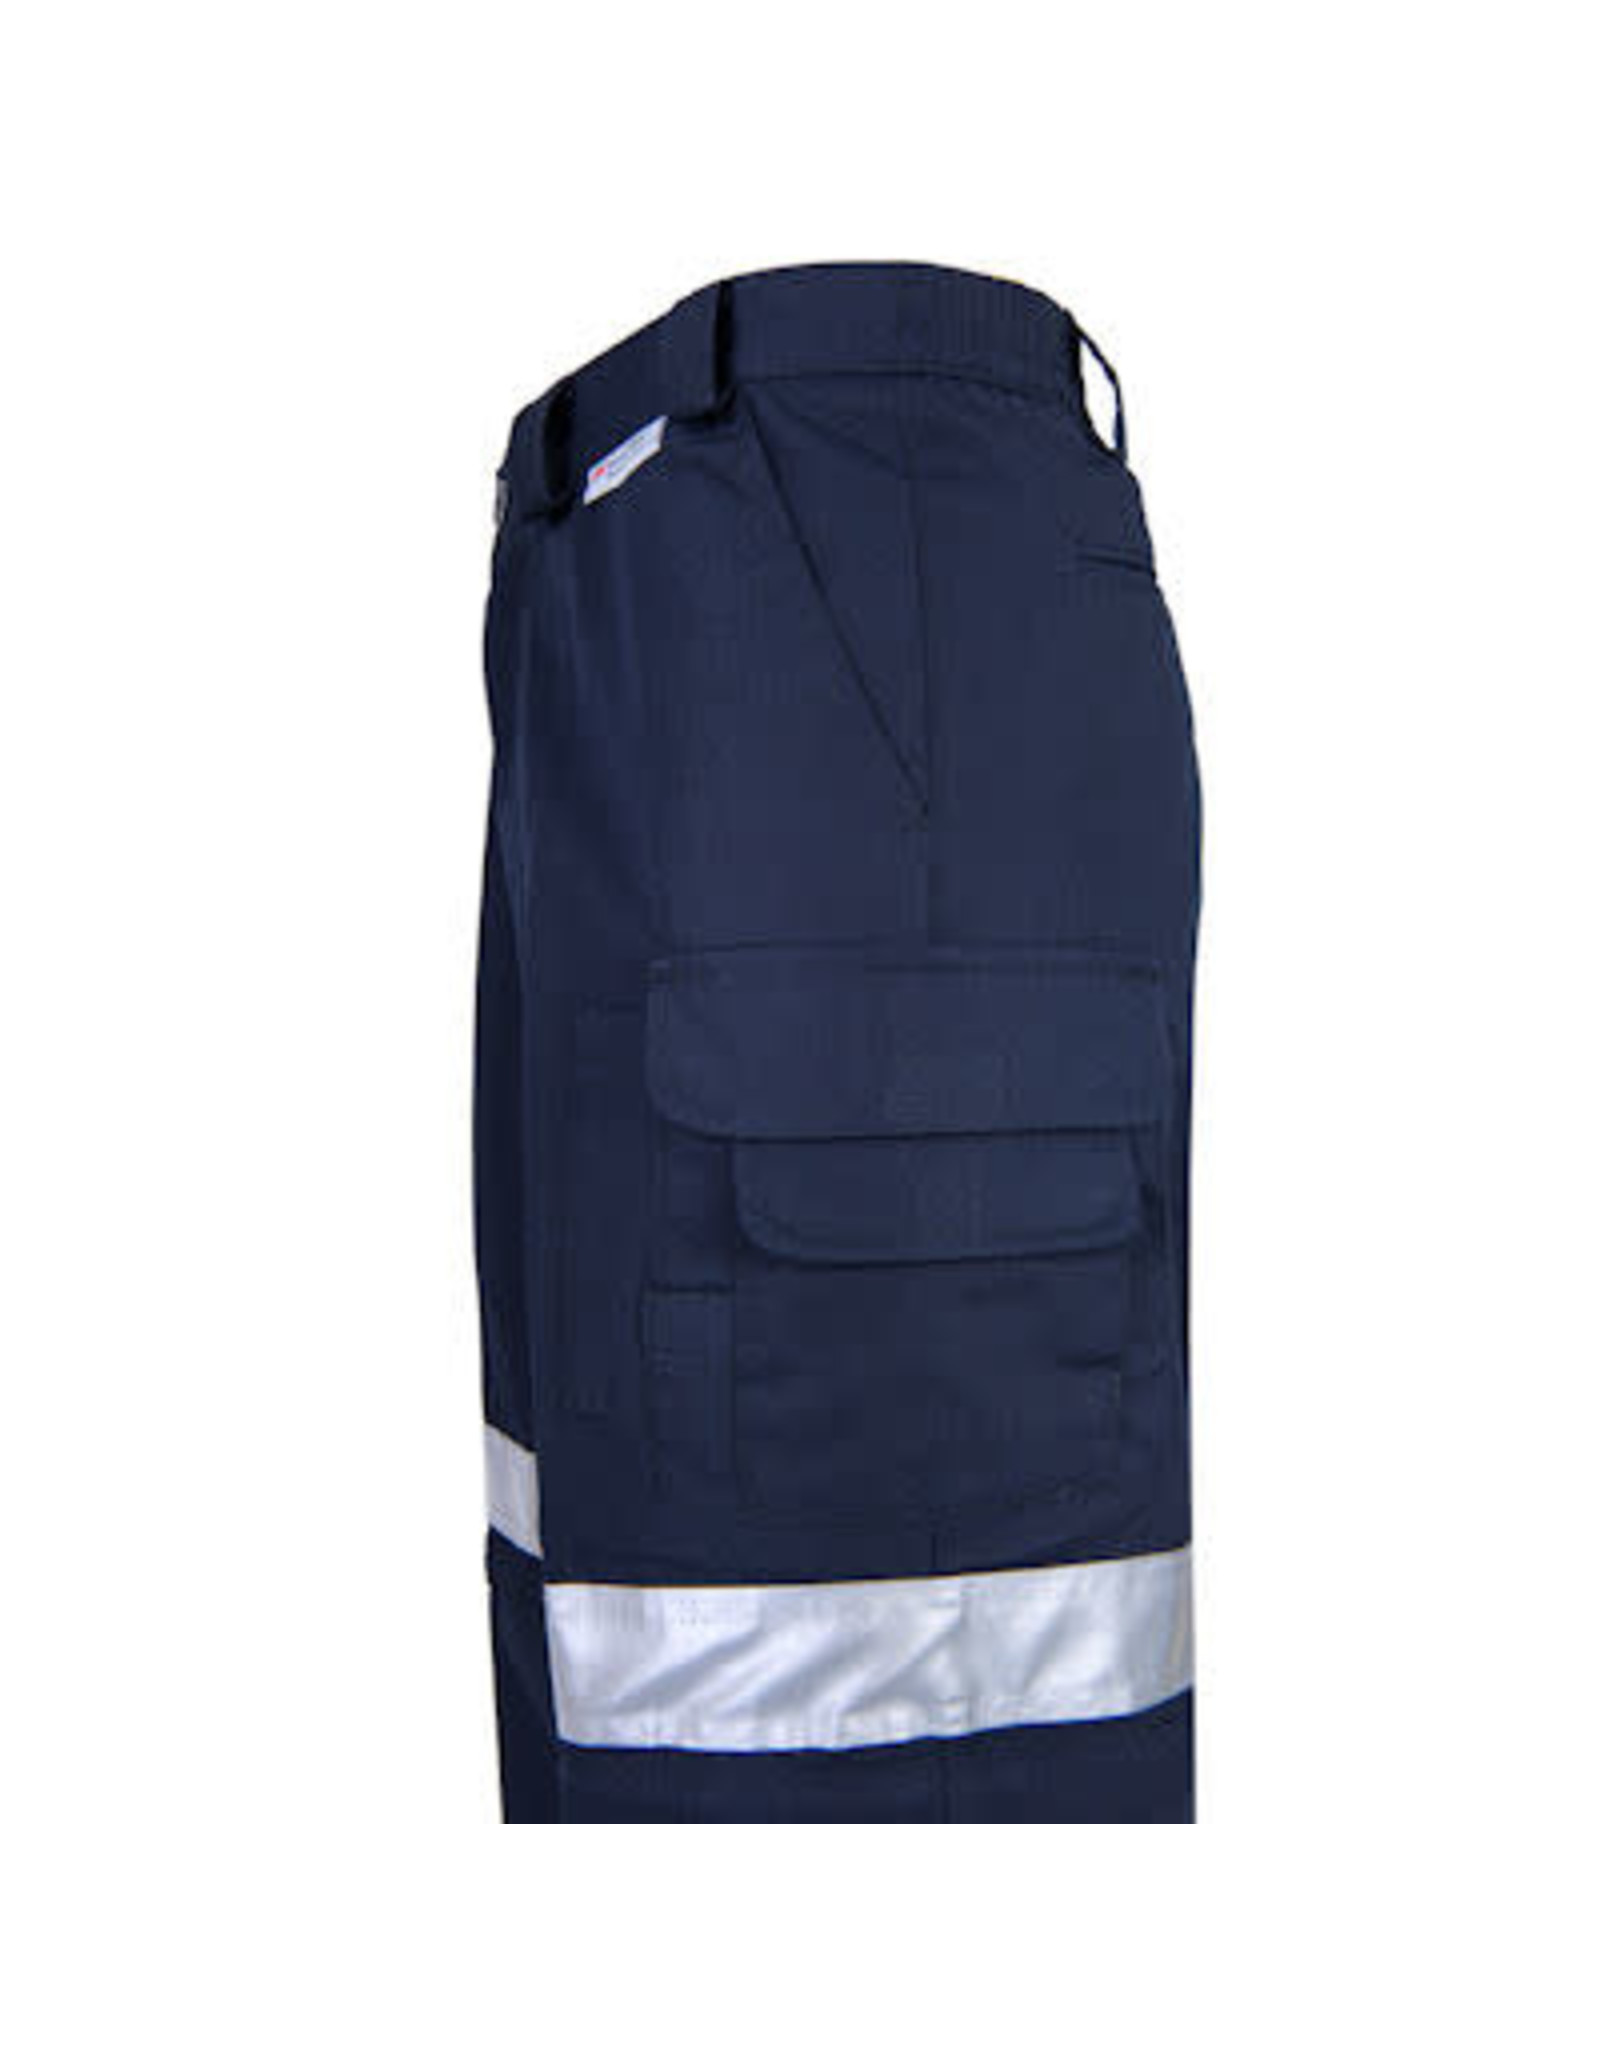 Coolworks Ventilated Work Pants